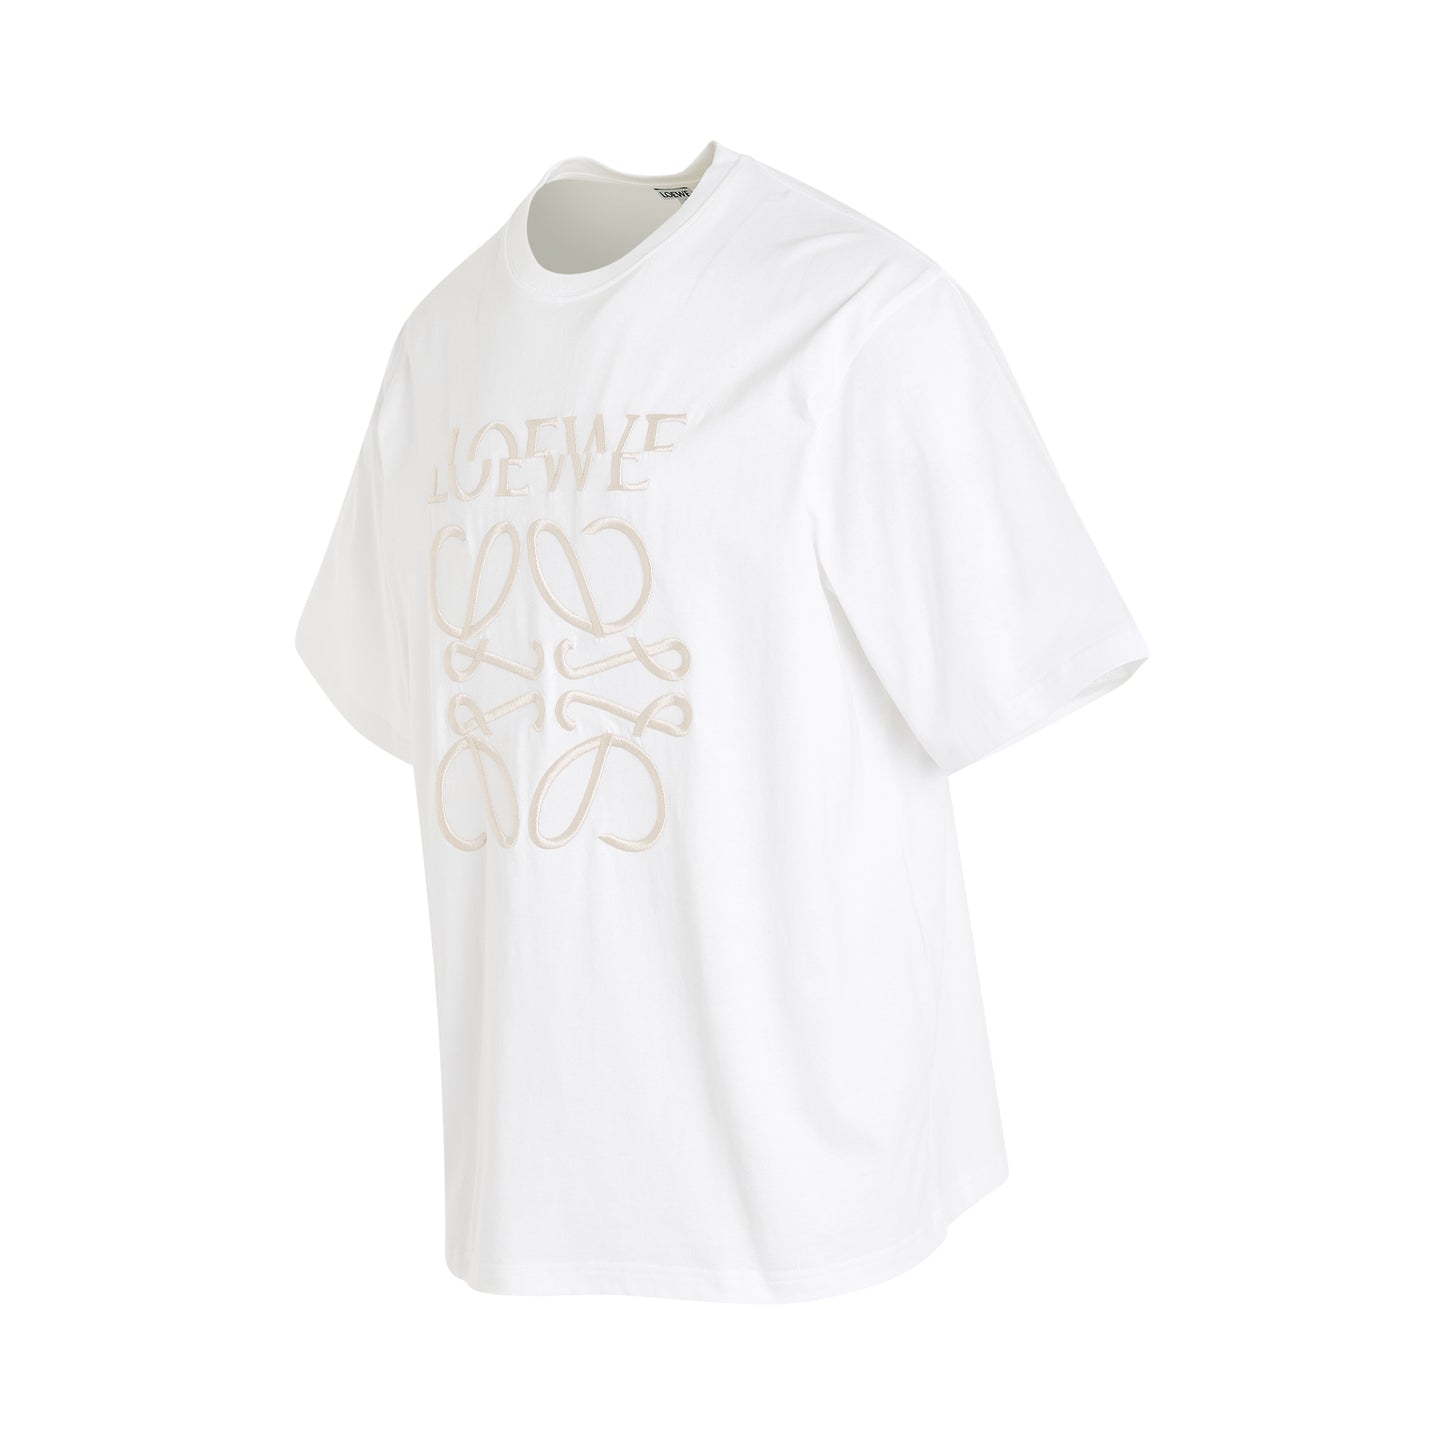 Embroidered Distorted Logo T-Shirt in Off White